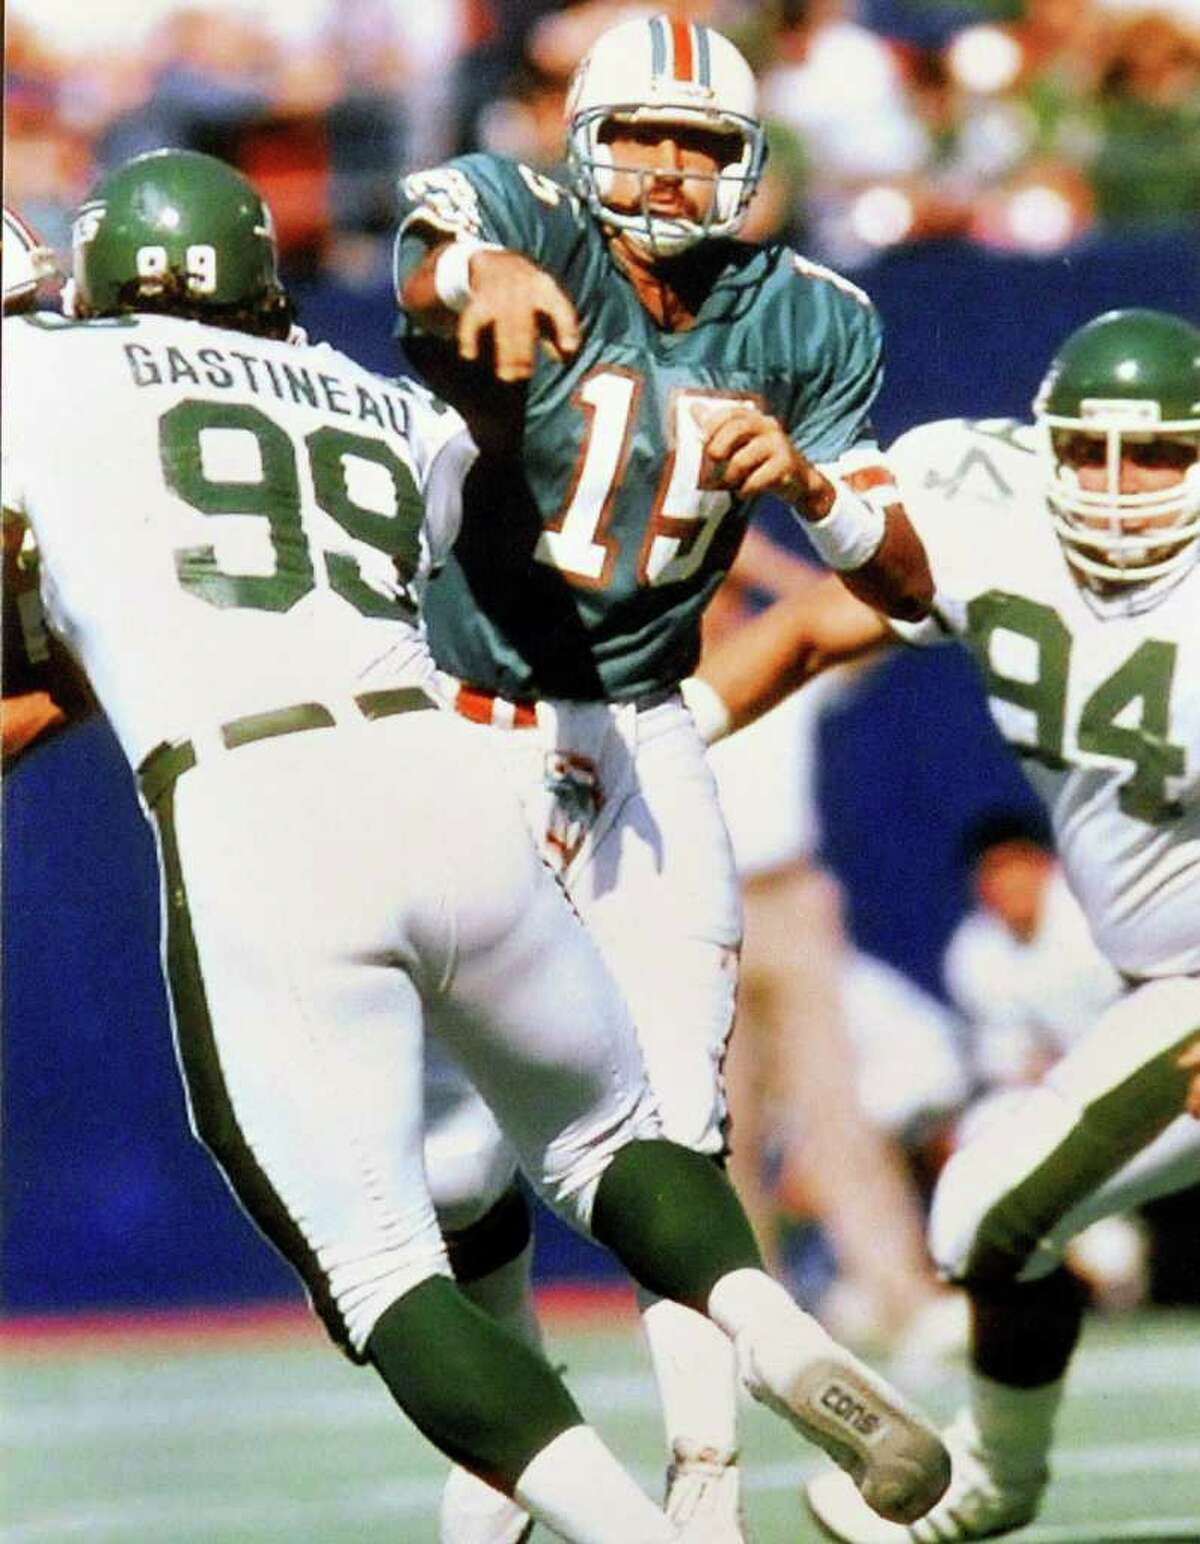 Miami Dolphin quarterback Kyle Mackey throws against the rush by NY Jets defensive end Mark Gastineau during the 1987 season. Mackey is a former National Football League player who played for the Miami Dolphins during the 1987 players strike and later played for the New York Jets. Tuesday, April 26, 2011. Valentino Mauricio/The Enterprise